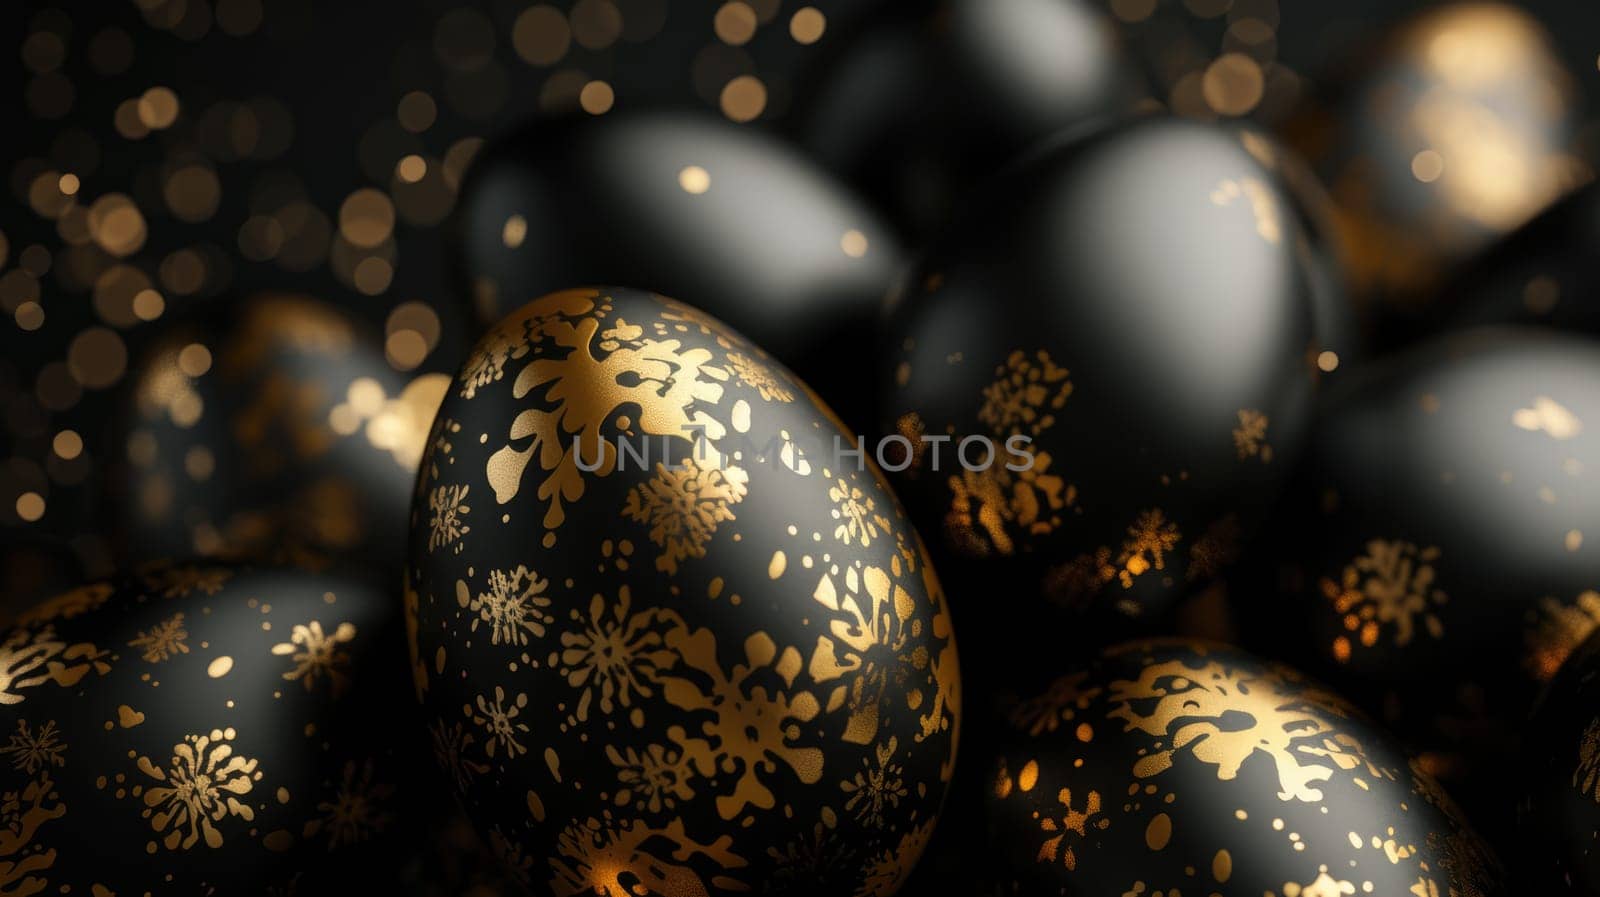 Gold metallic and black Easter Eggs on dark Background. Happy Easter eggs.